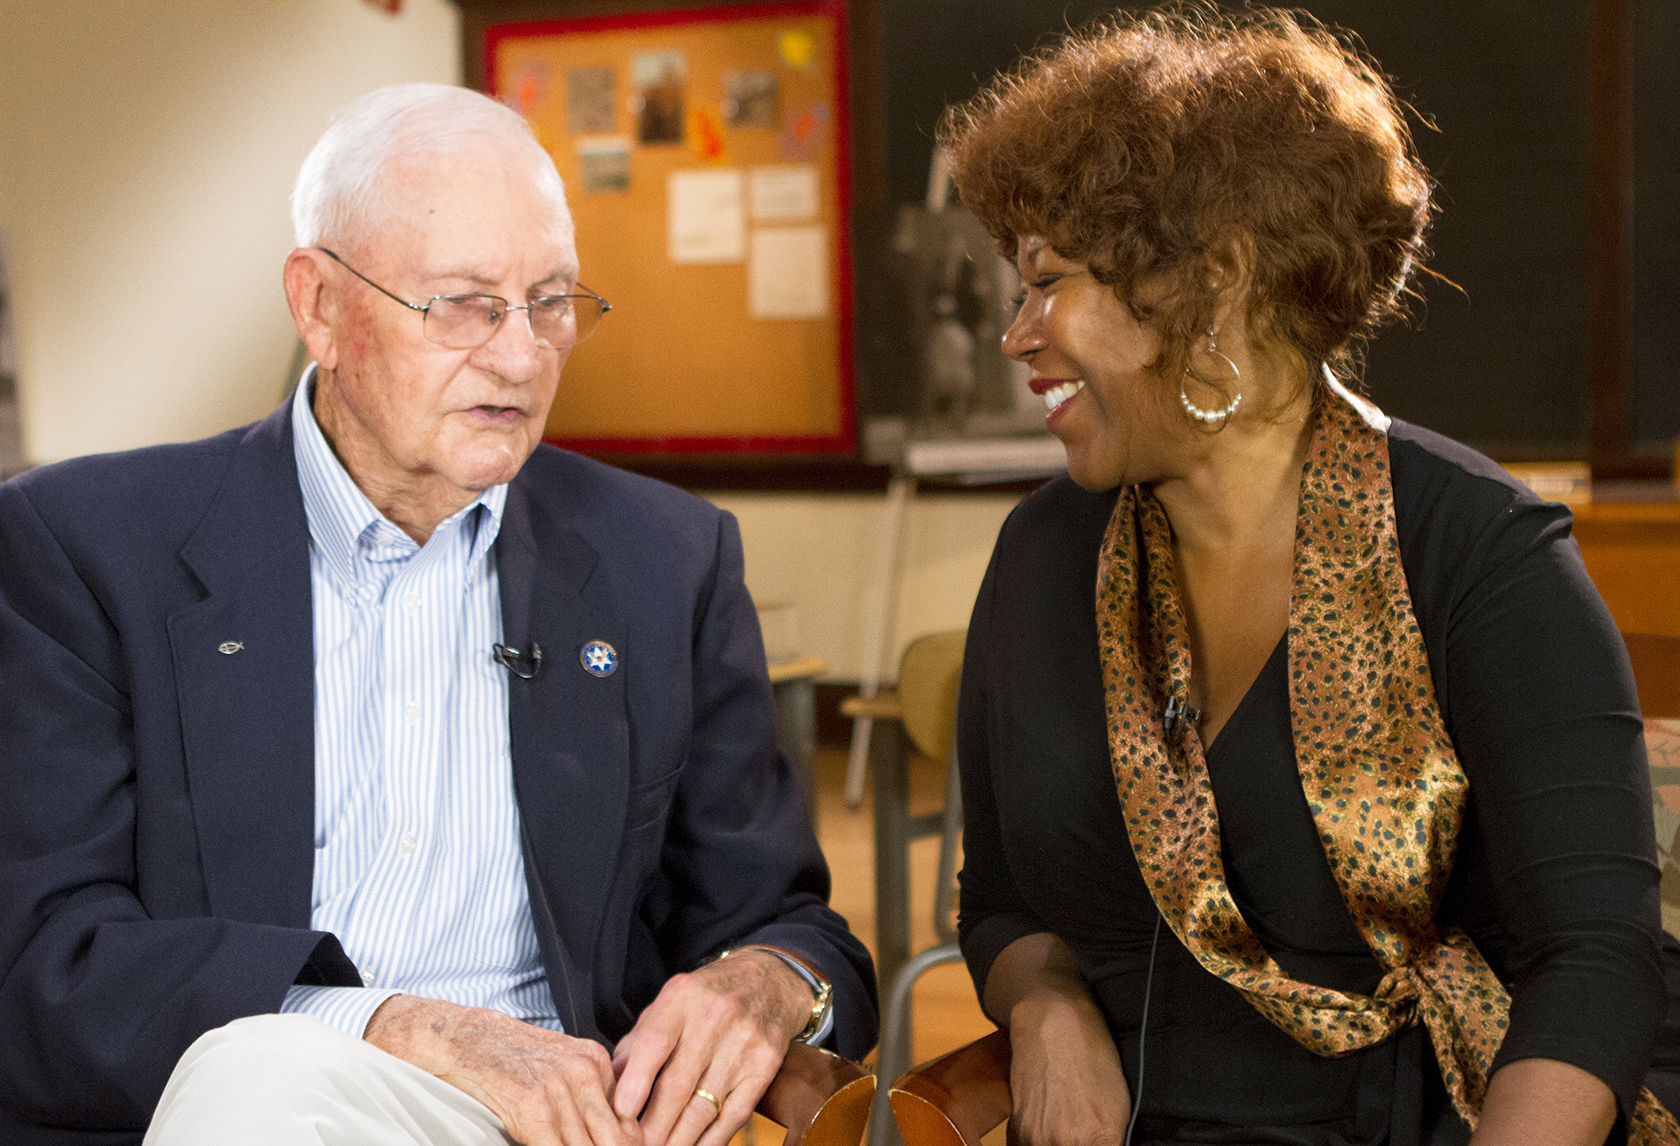 Charles Burks and Ruby Bridges talk about what it was like before integration.